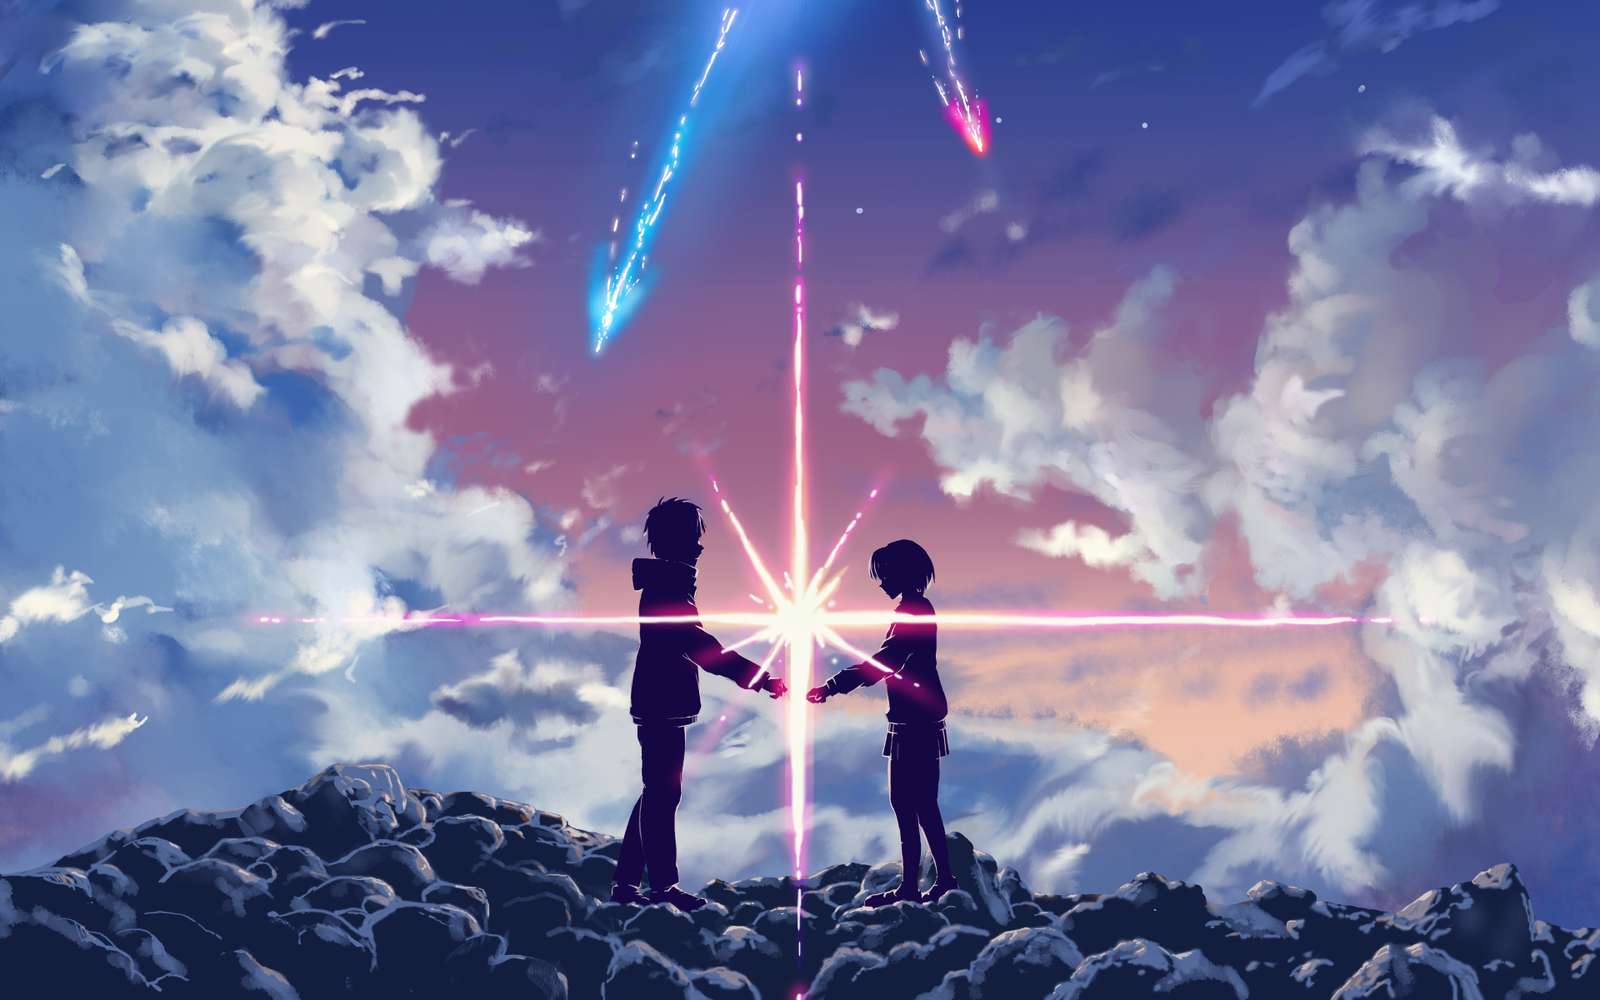 your name online puzzle